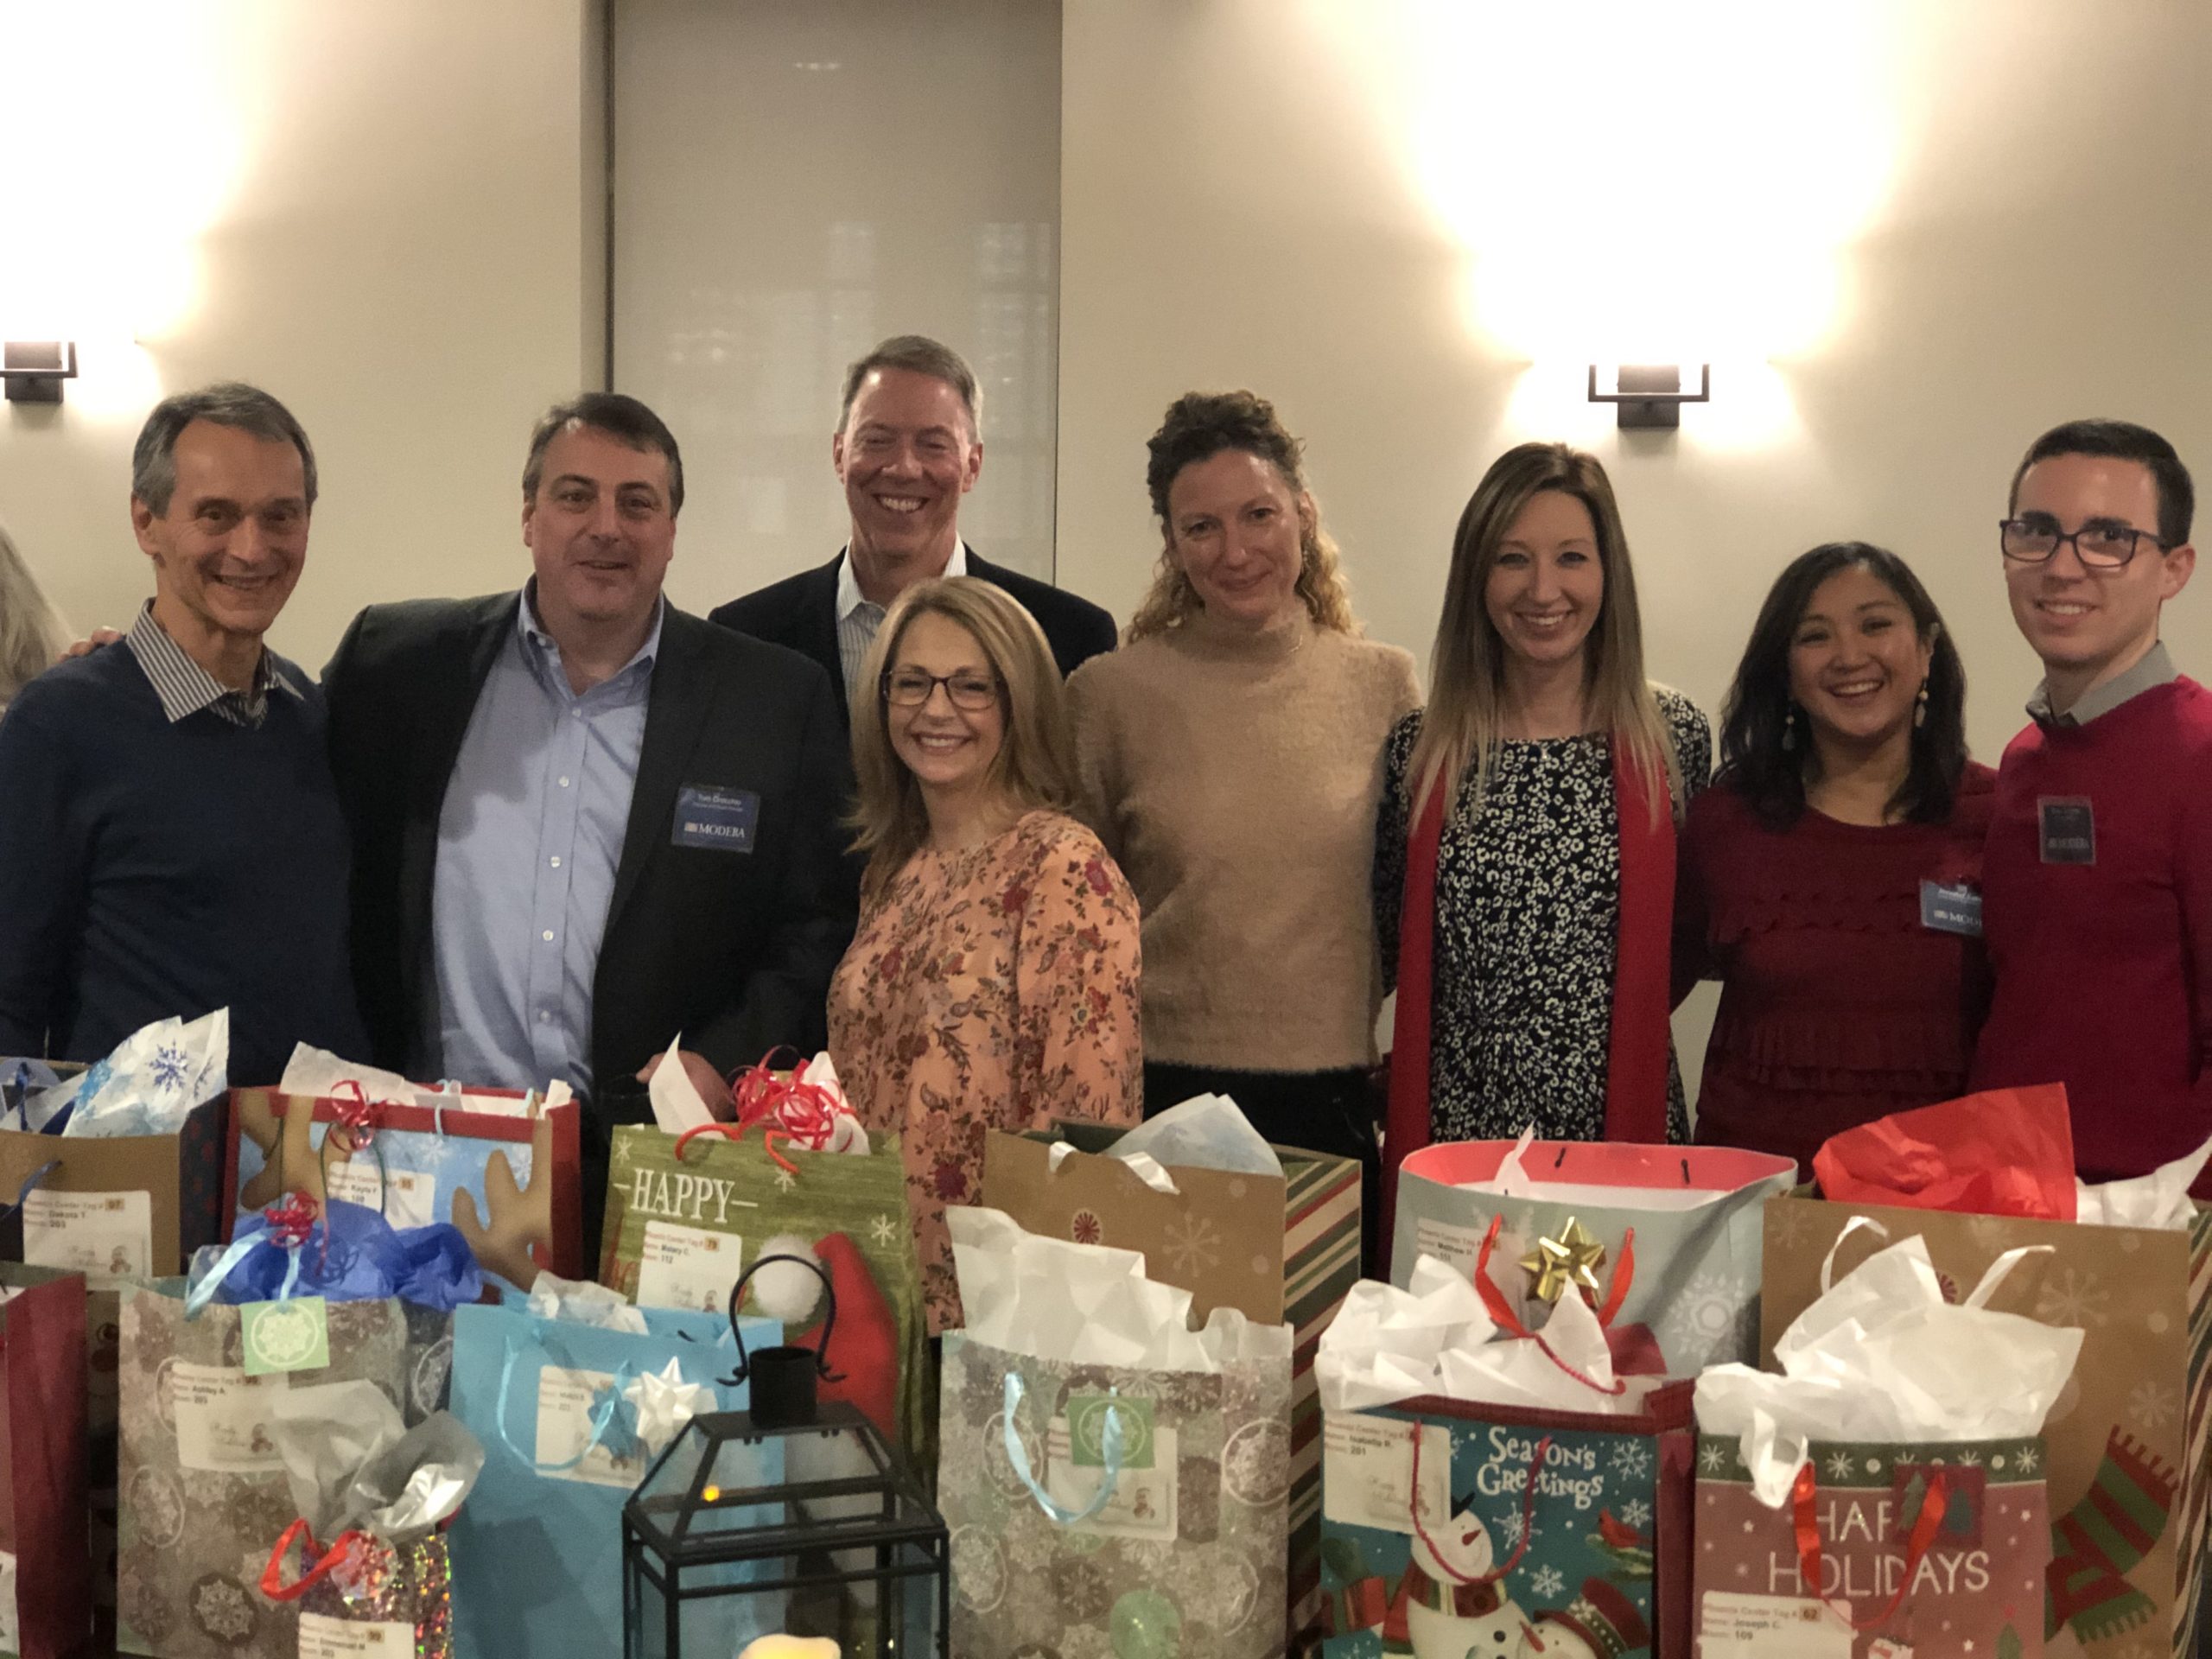 the Modera NJ office wraps gifts to benefit kids of the Phoenix Center